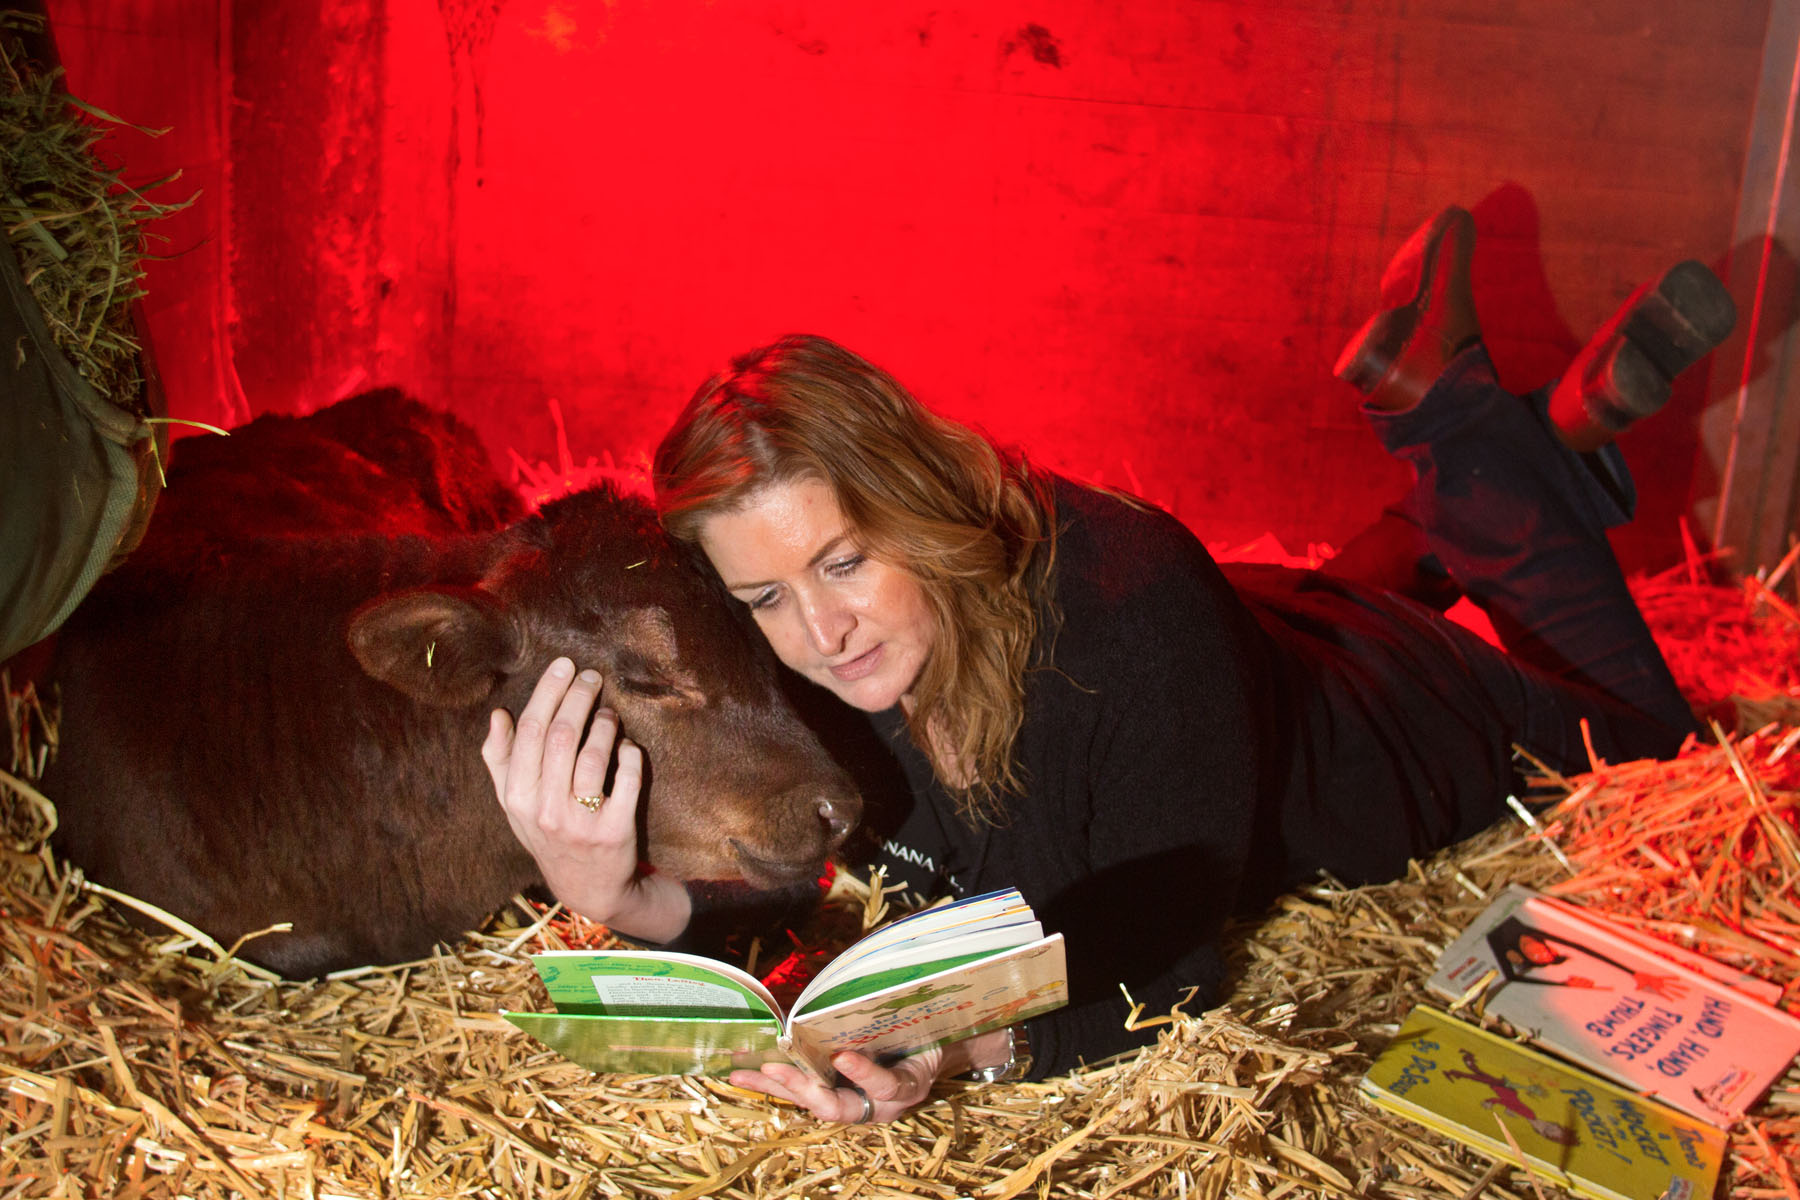 Clarence, a calf rescued from a ditch, is comforted by volunteer Caroline Morgan who reads a Dr. Seuss book to him at the Northwest Equine Stewardship Center, in Snohomish, Washington on April 13, 2014. (photo by Karen Ducey Photography/karenducey.com)